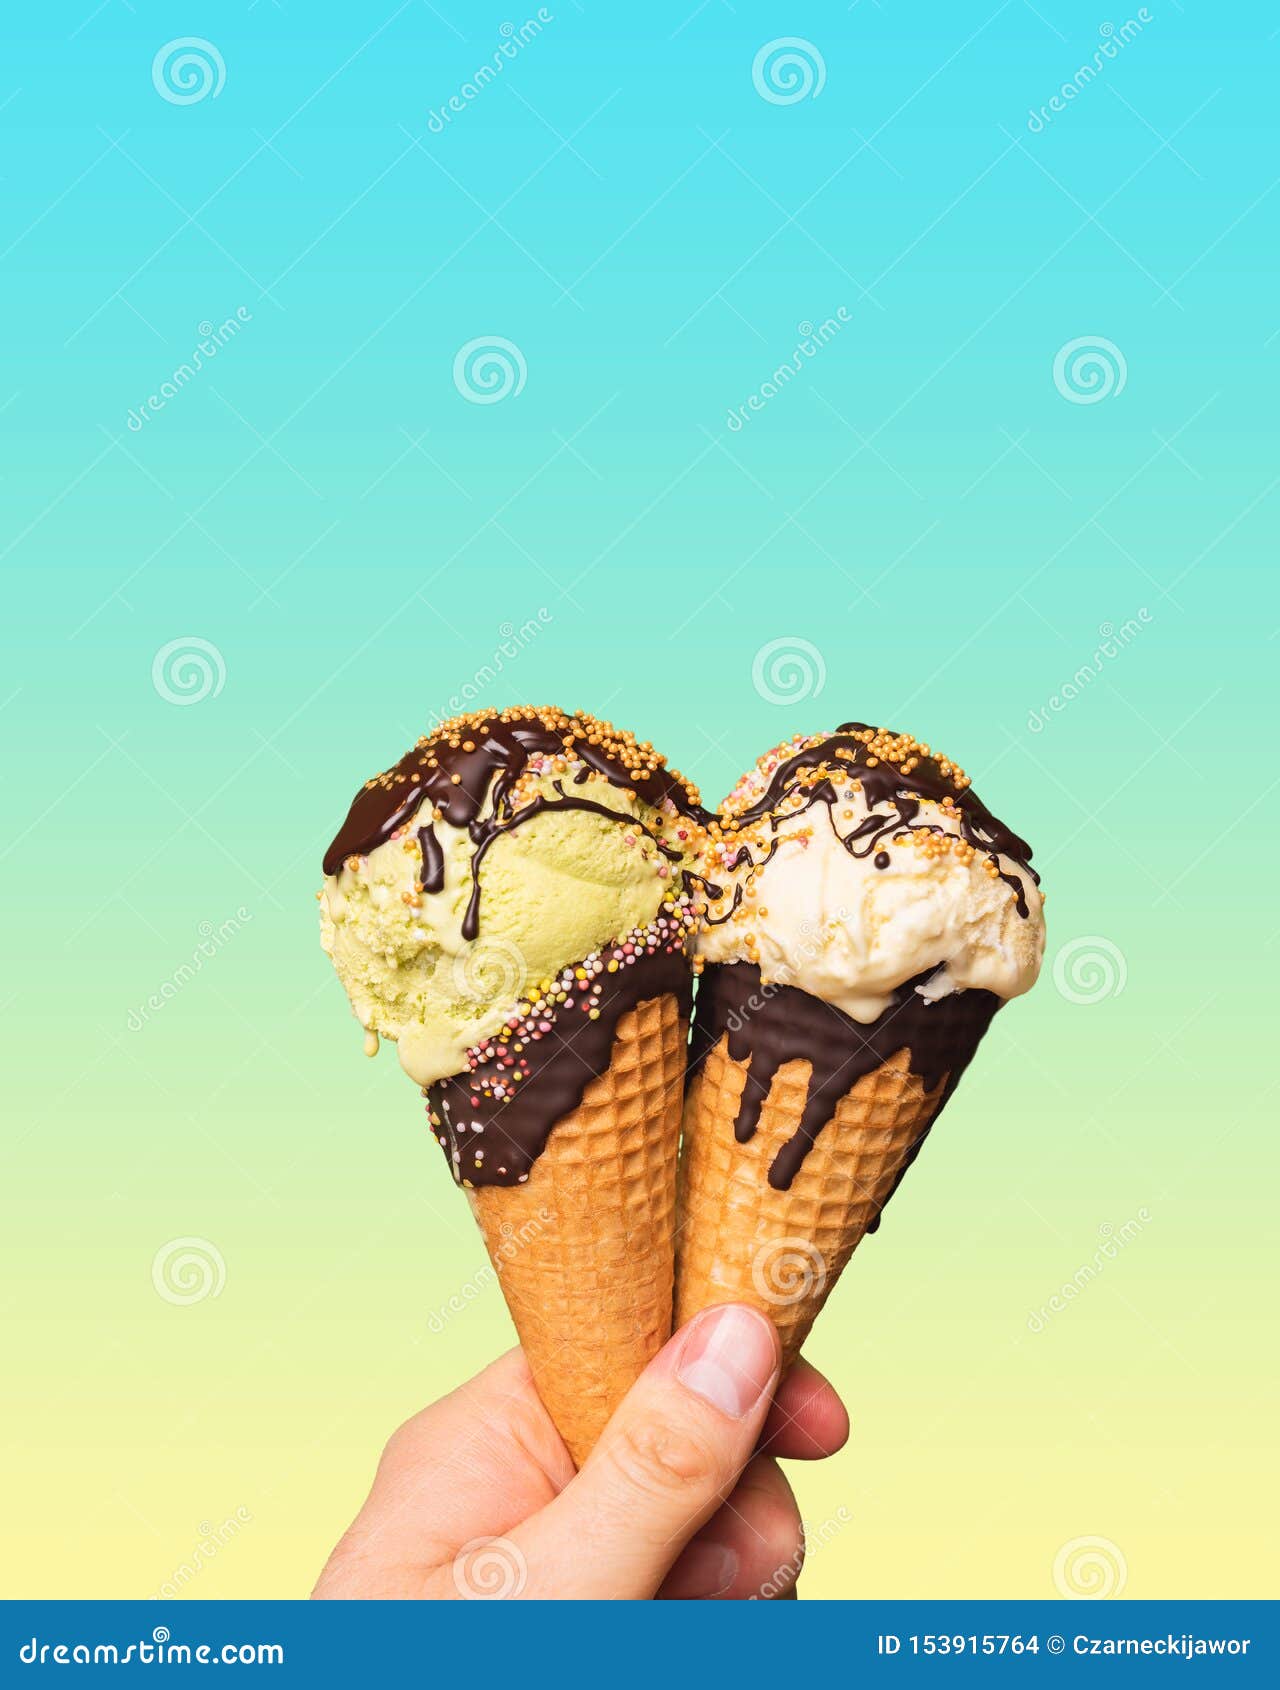 https://thumbs.dreamstime.com/z/ice-cream-cones-held-palm-your-hand-wafers-dessert-chocolate-topping-colored-sprinkles-rainbow-153915764.jpg